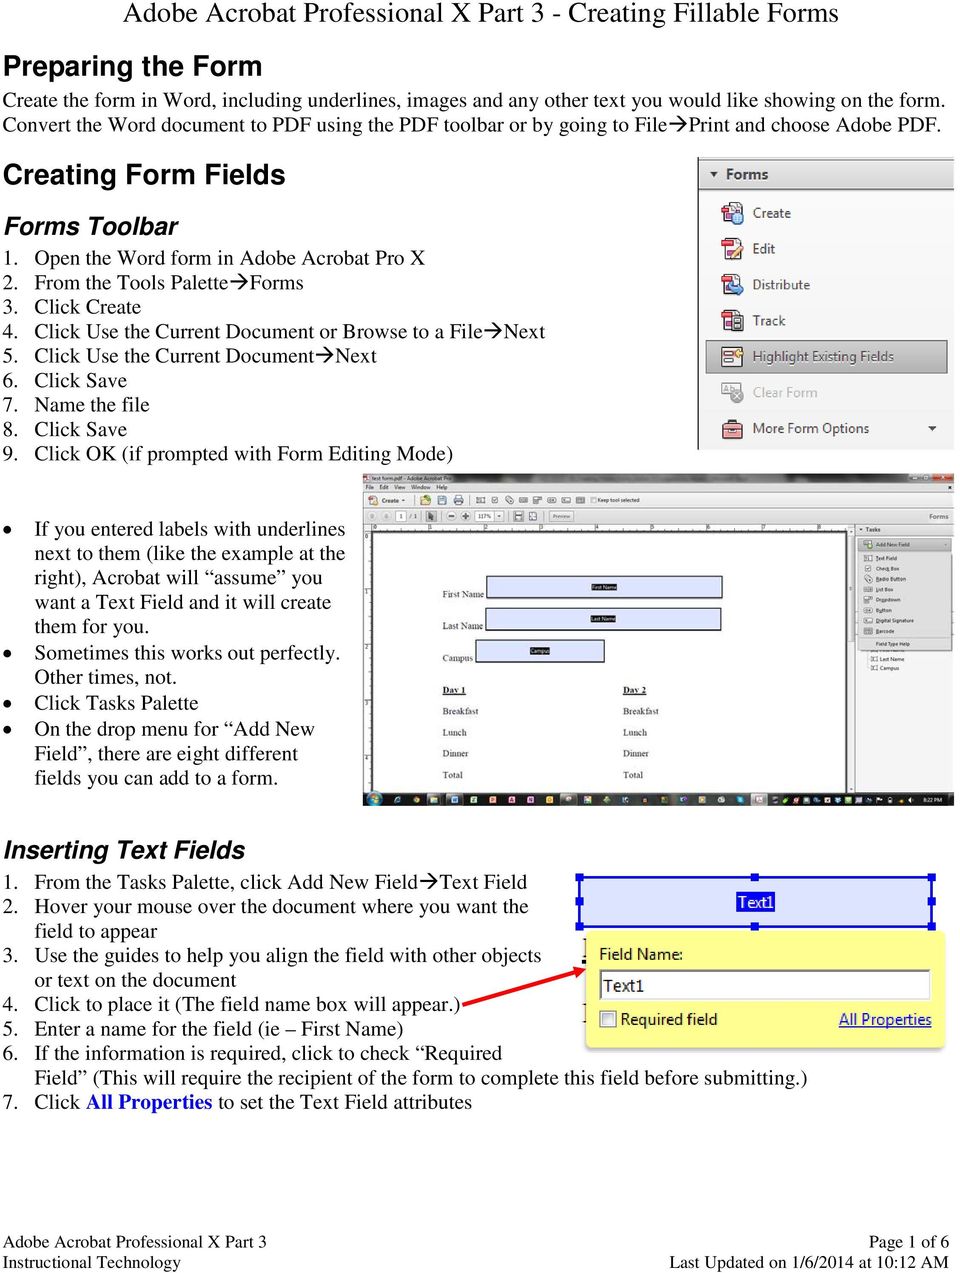 From the Tools Palette Forms 3. Click Create 4. Click Use the Current Document or Browse to a File Next 5. Click Use the Current Document Next 6. Click Save 7. Name the file 8. Click Save 9.